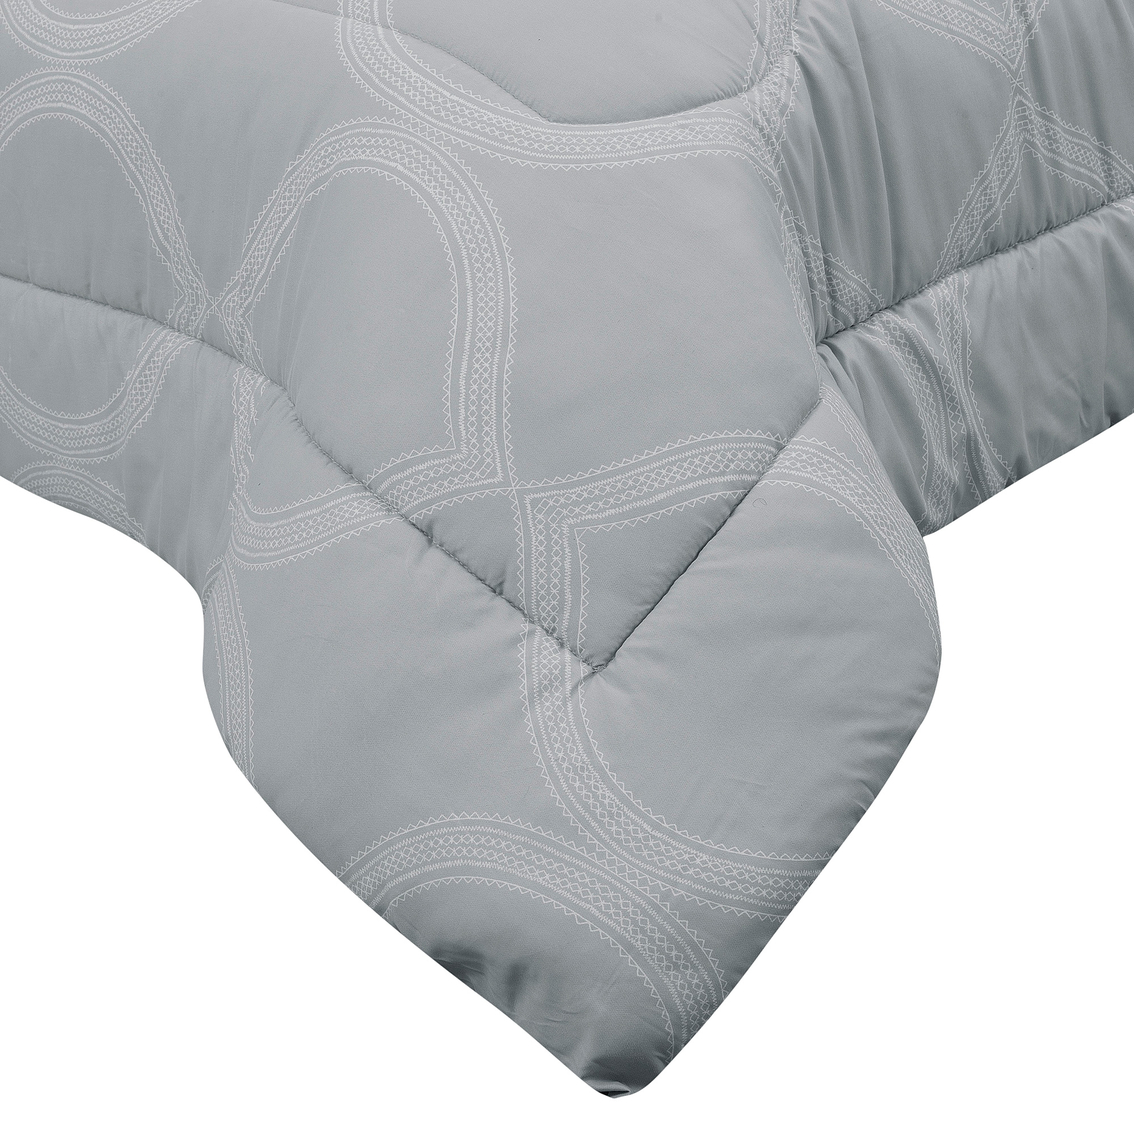 Ogee Bed in a Bag with Solid Reverse Comforter Queen - Image 2 of 4